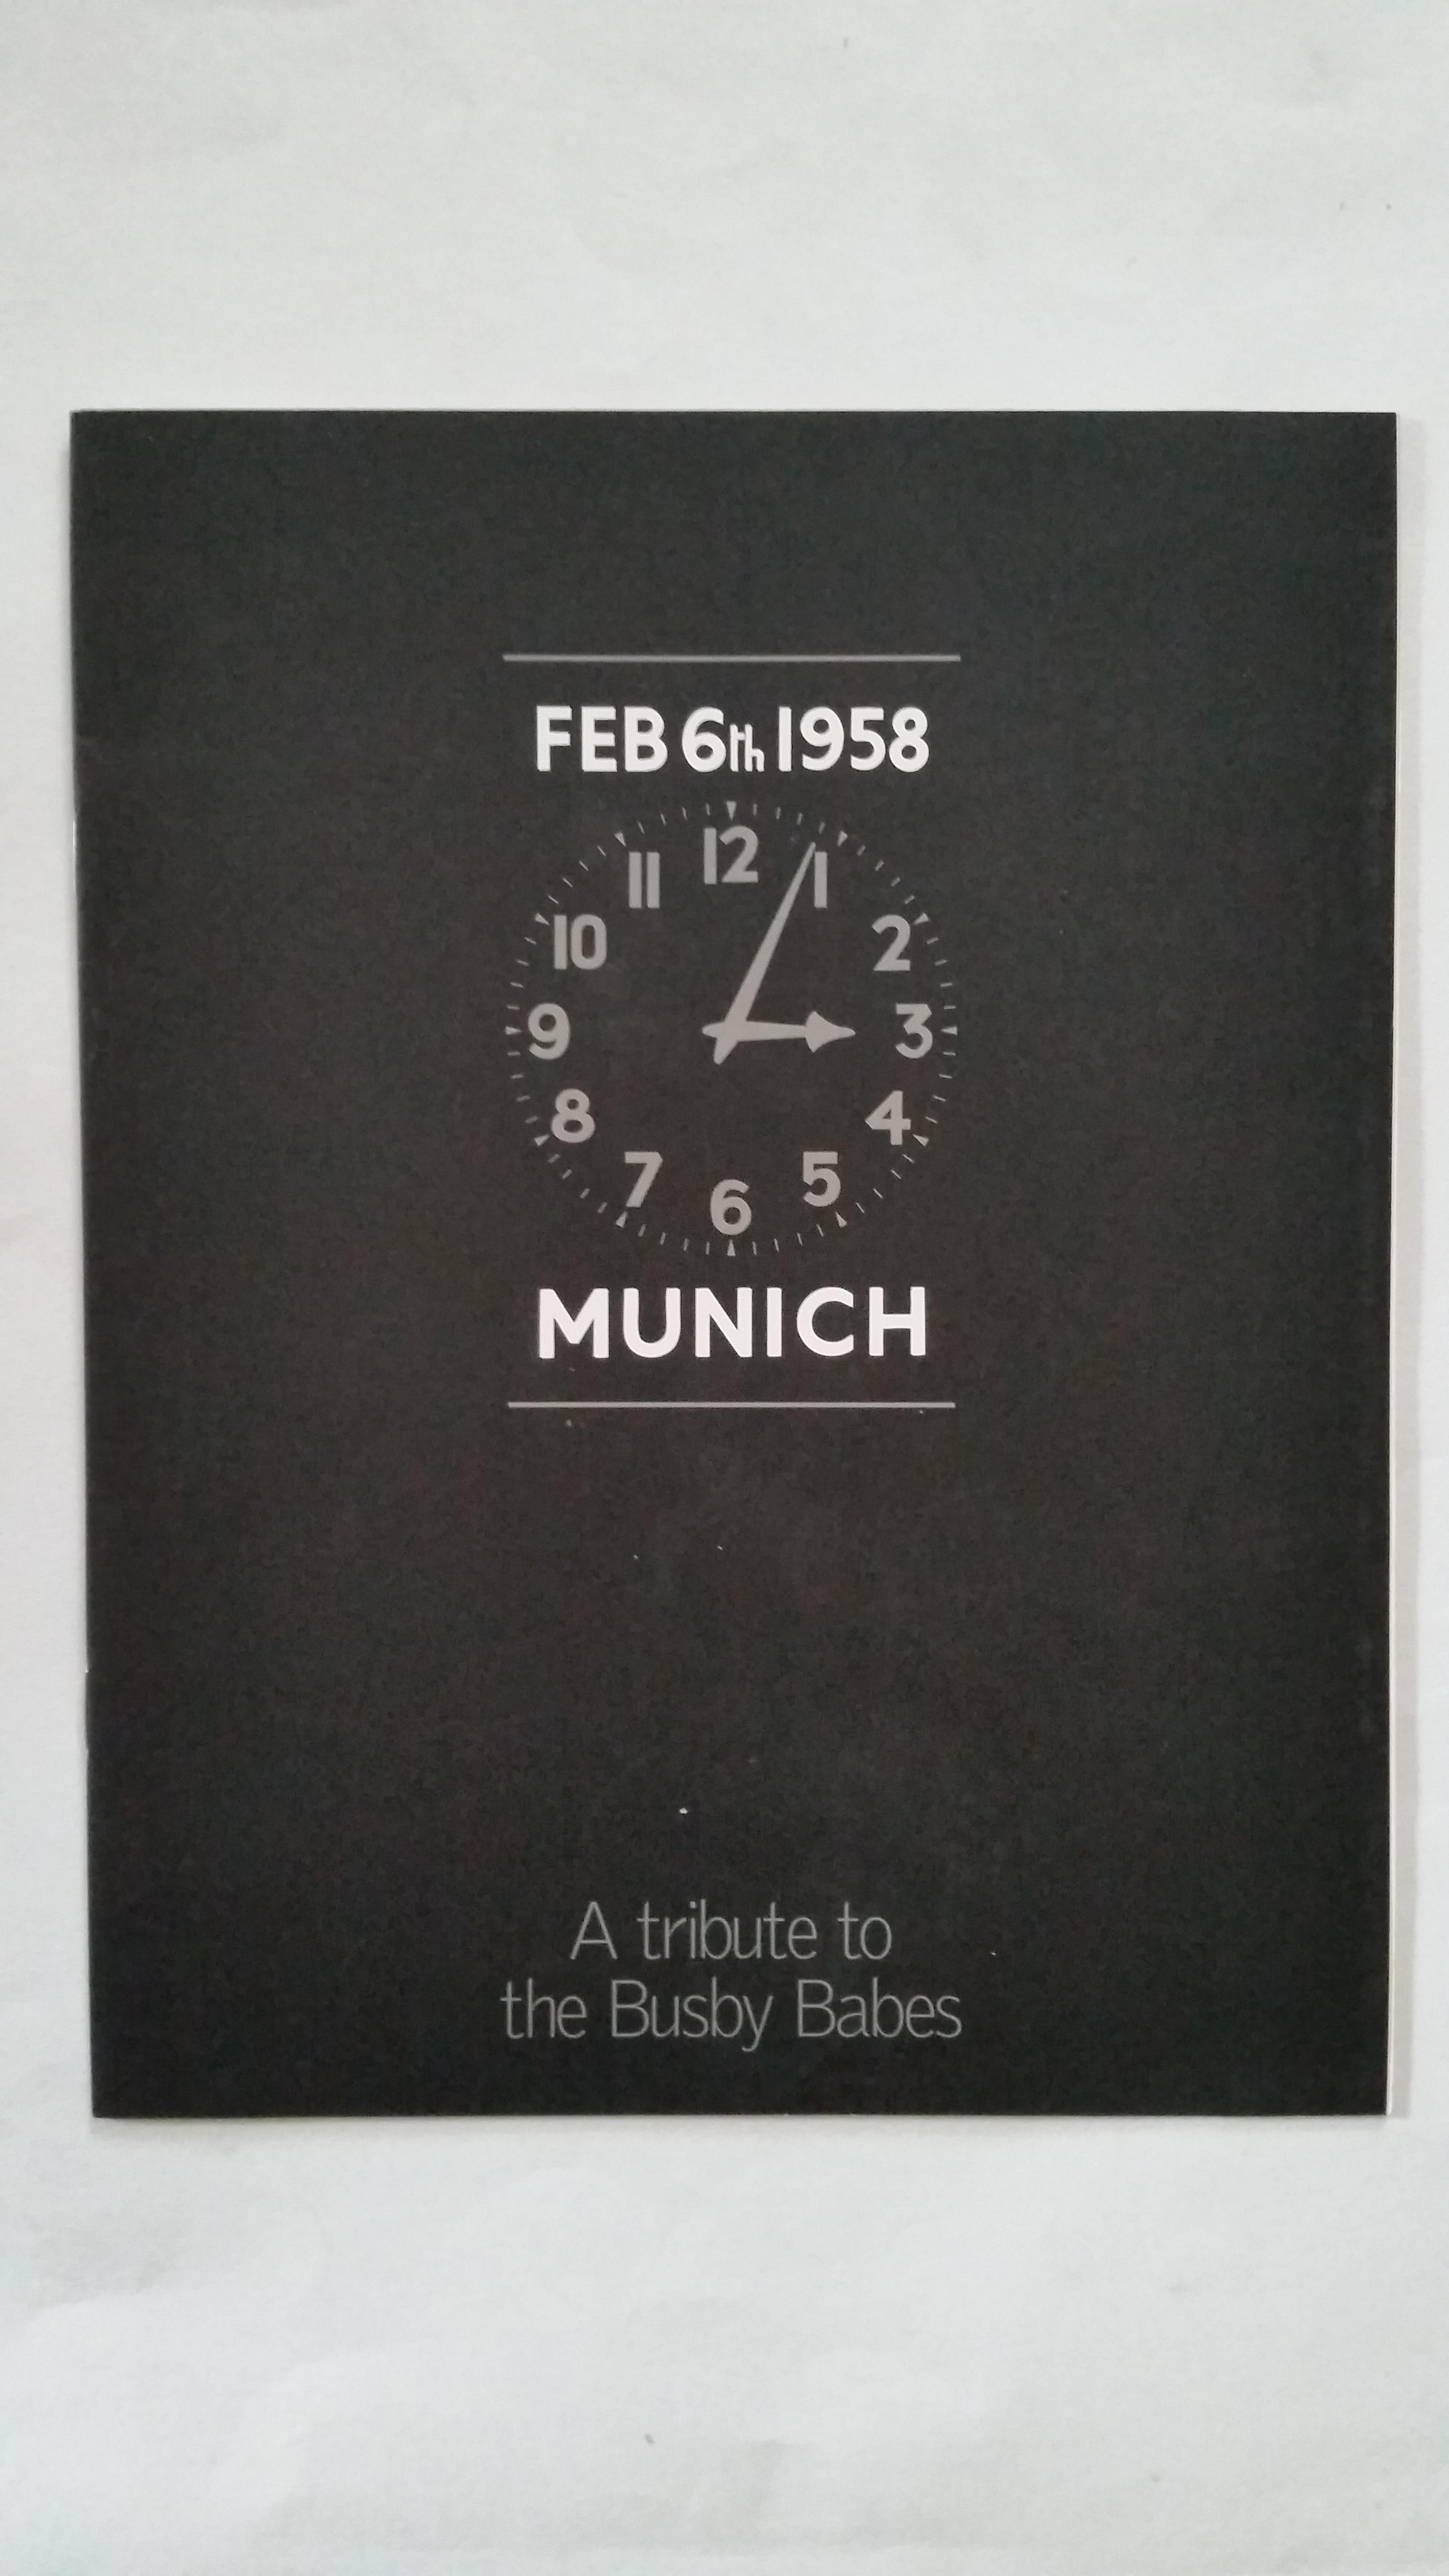 FOOTBALL, Manchester United, Munich Air Disaster selection, inc. A Tribute to the Busby Babes